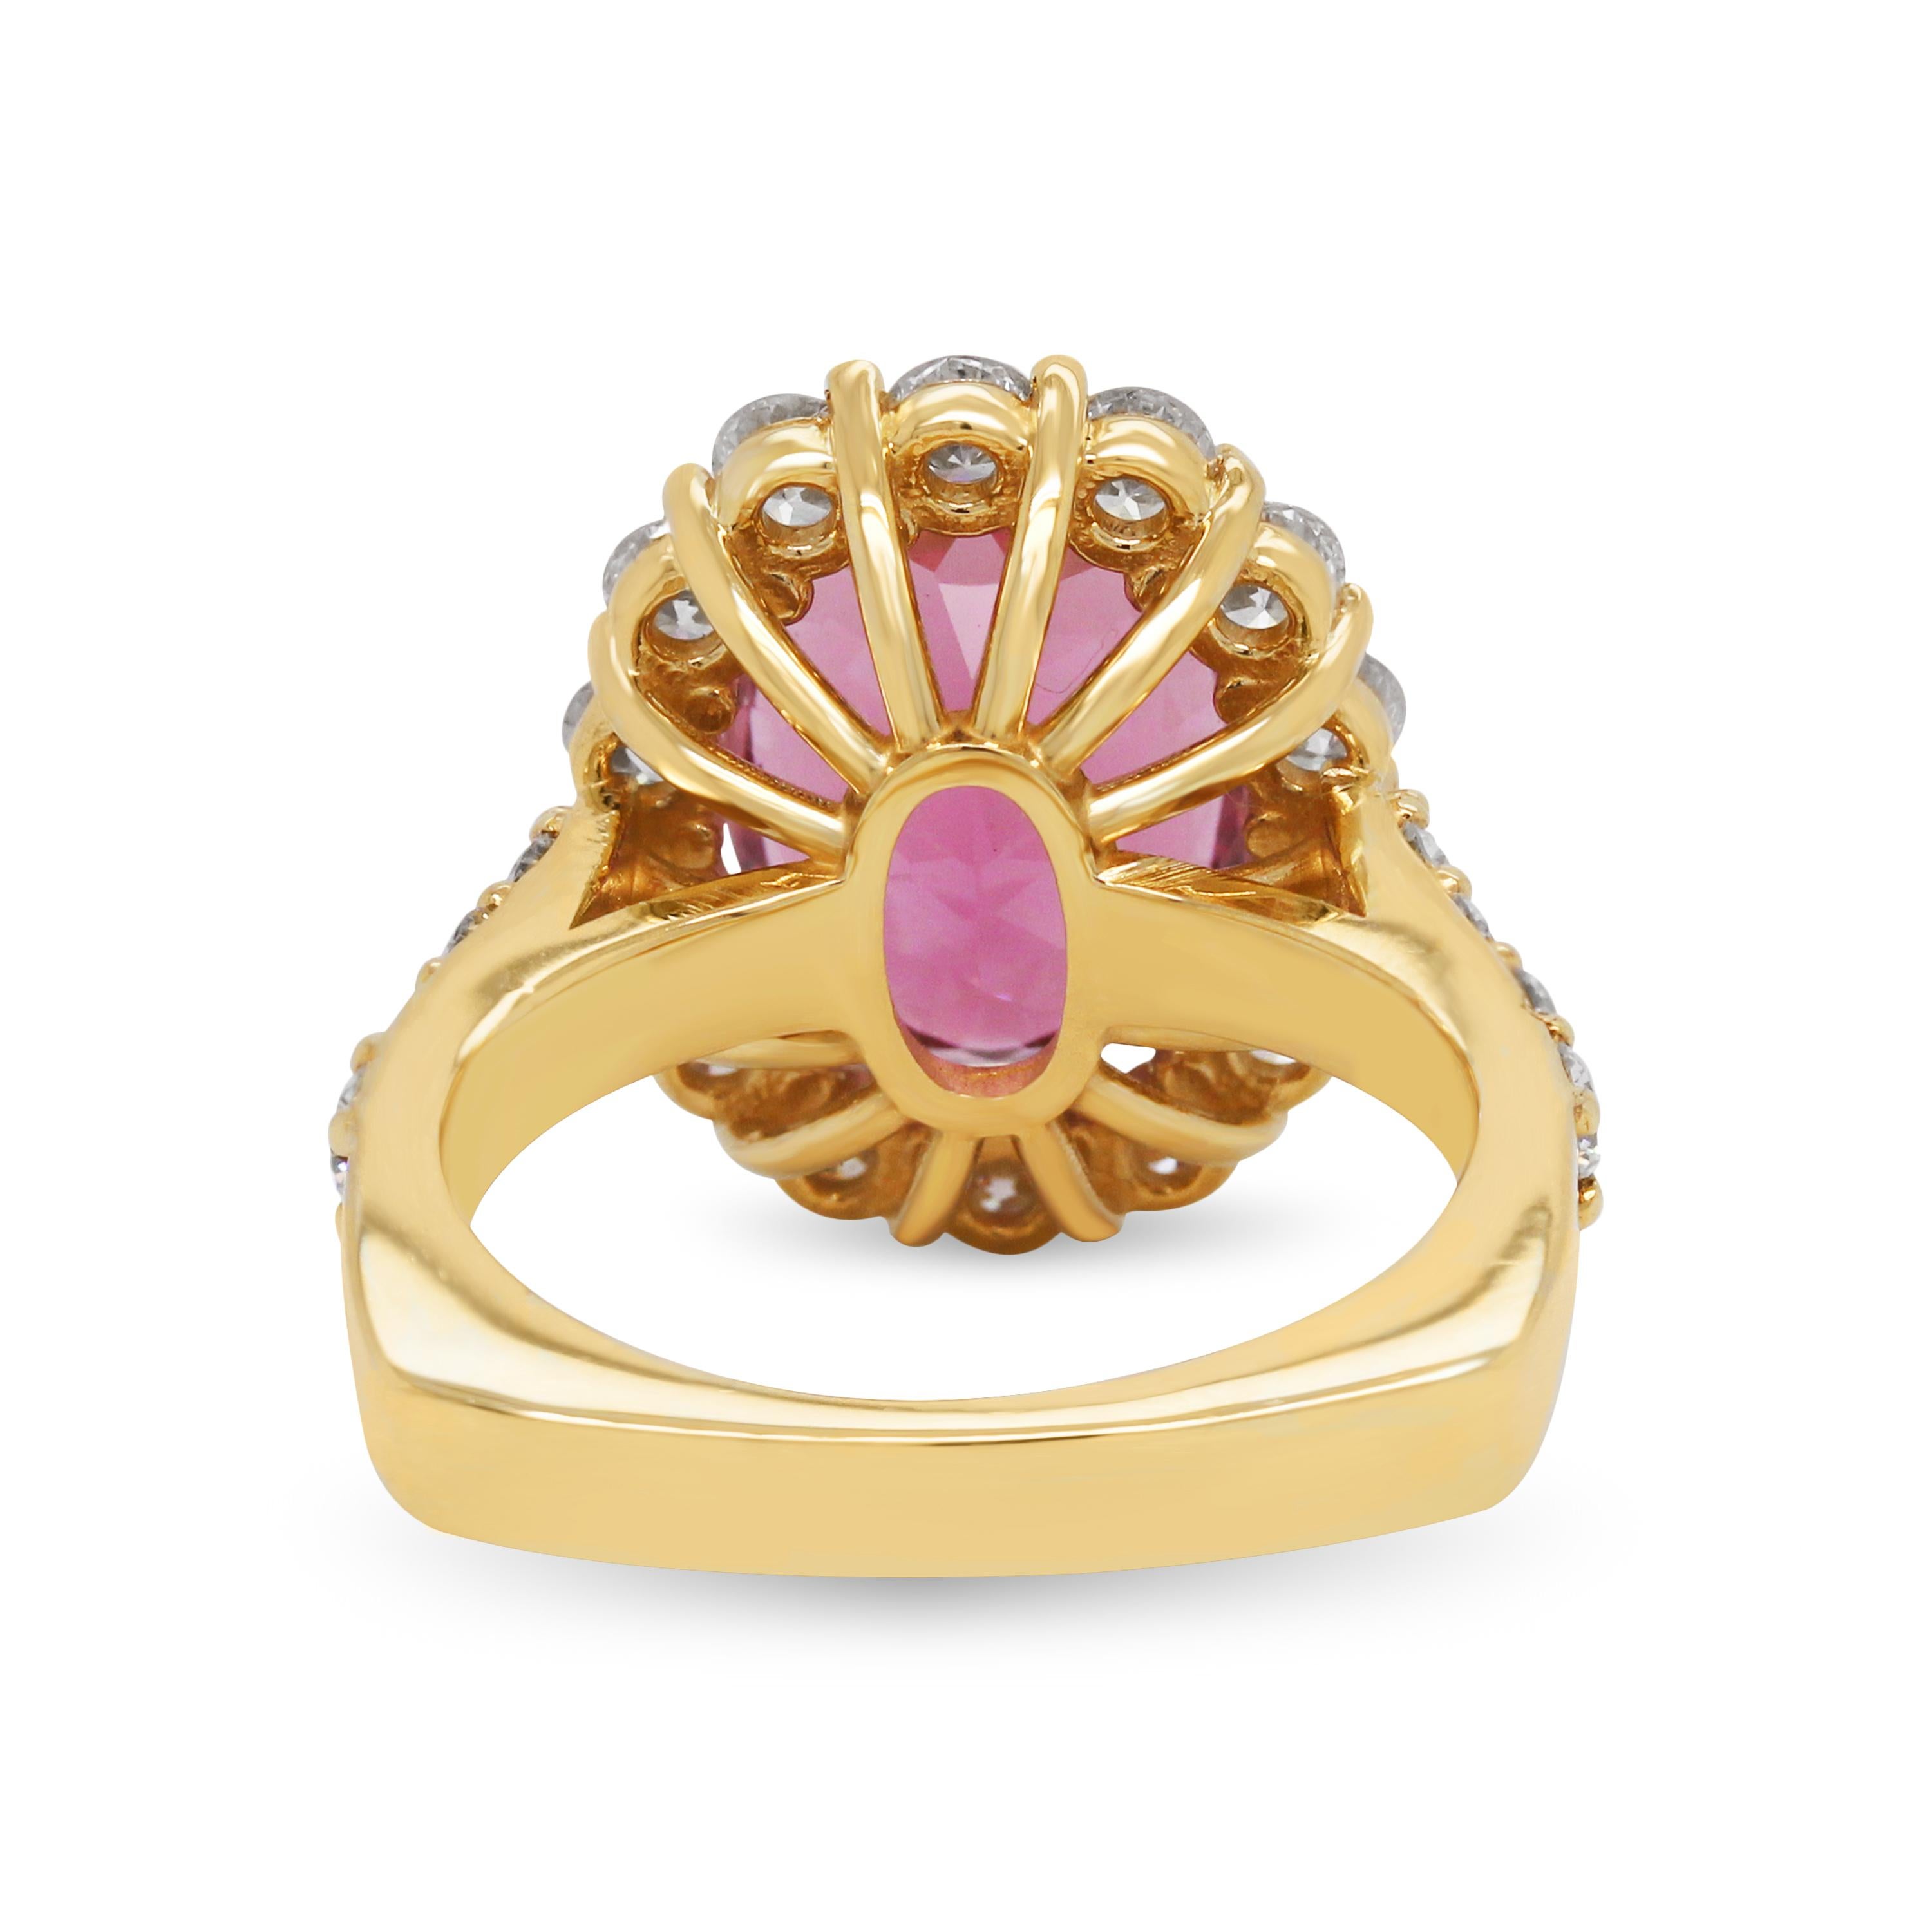 5.89 Carat Oval Cut Pink Tourmaline 18 Karat Yellow Gold Diamond Cocktail Ring In New Condition For Sale In Boca Raton, FL